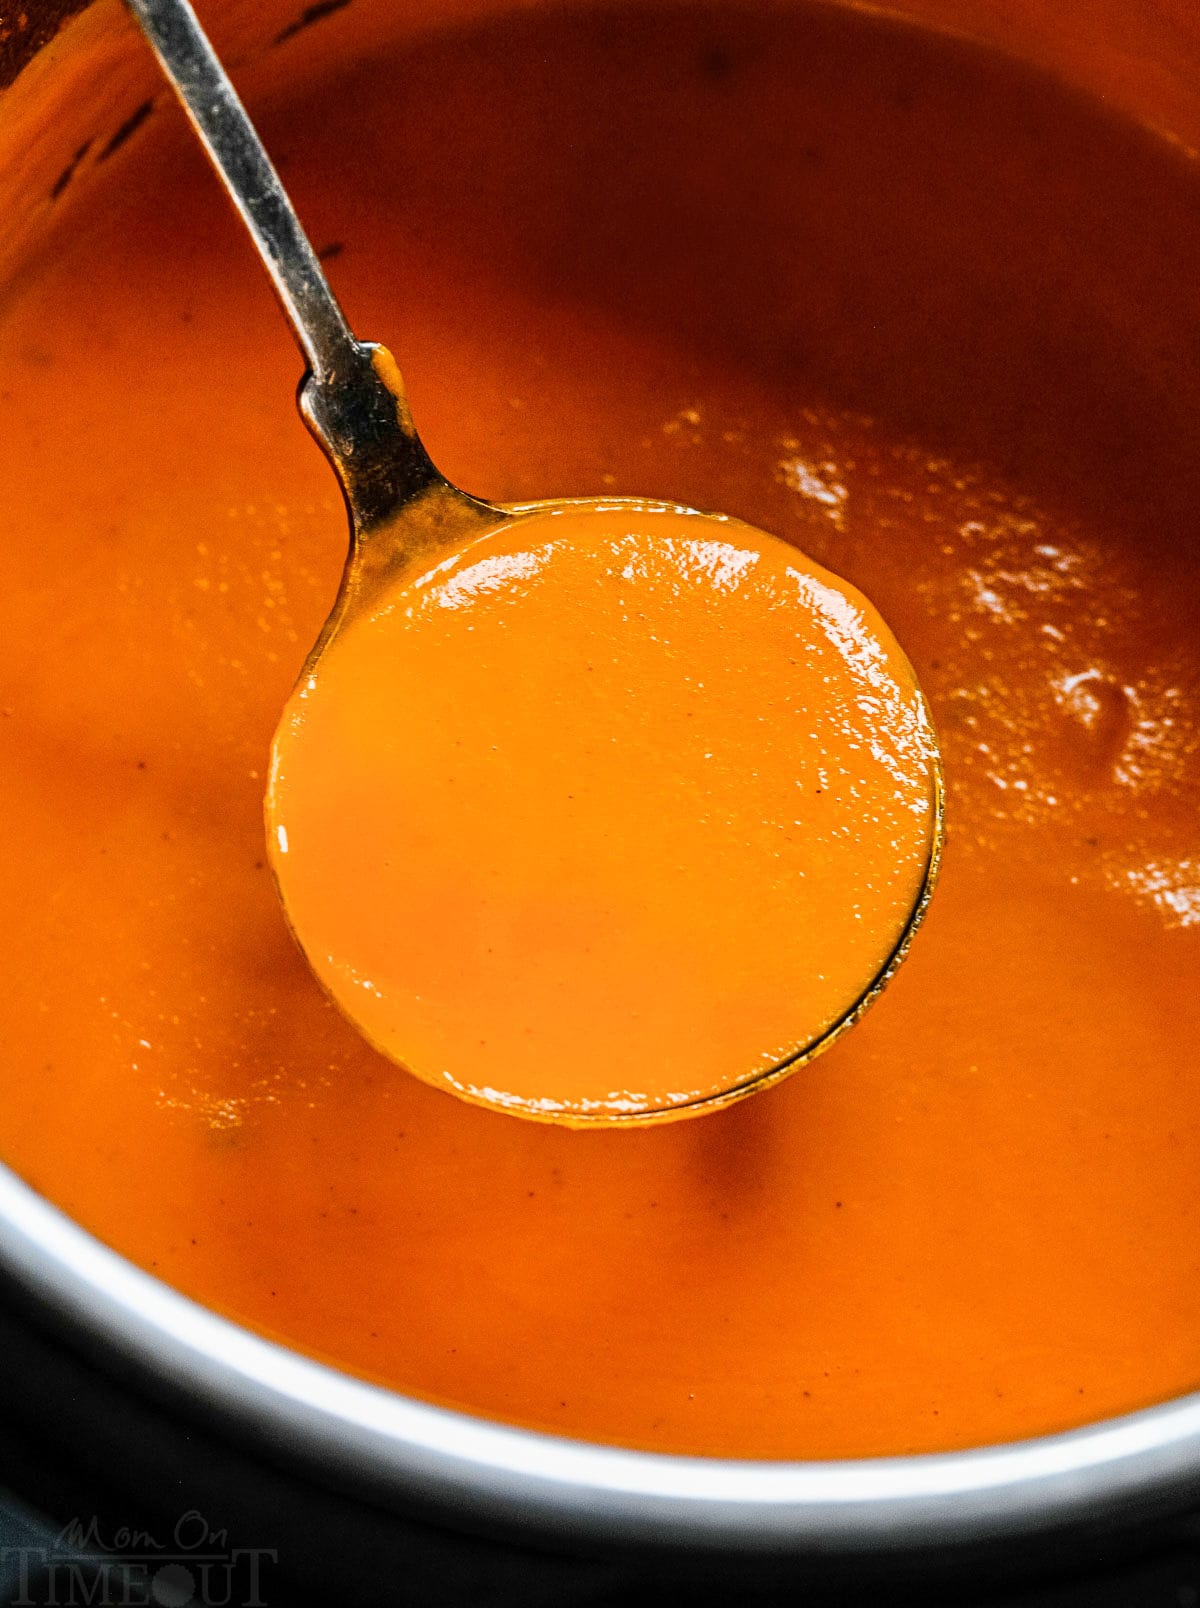 instant pot filled with tomato soup and a ladle lifting out a ladle full of the soup.